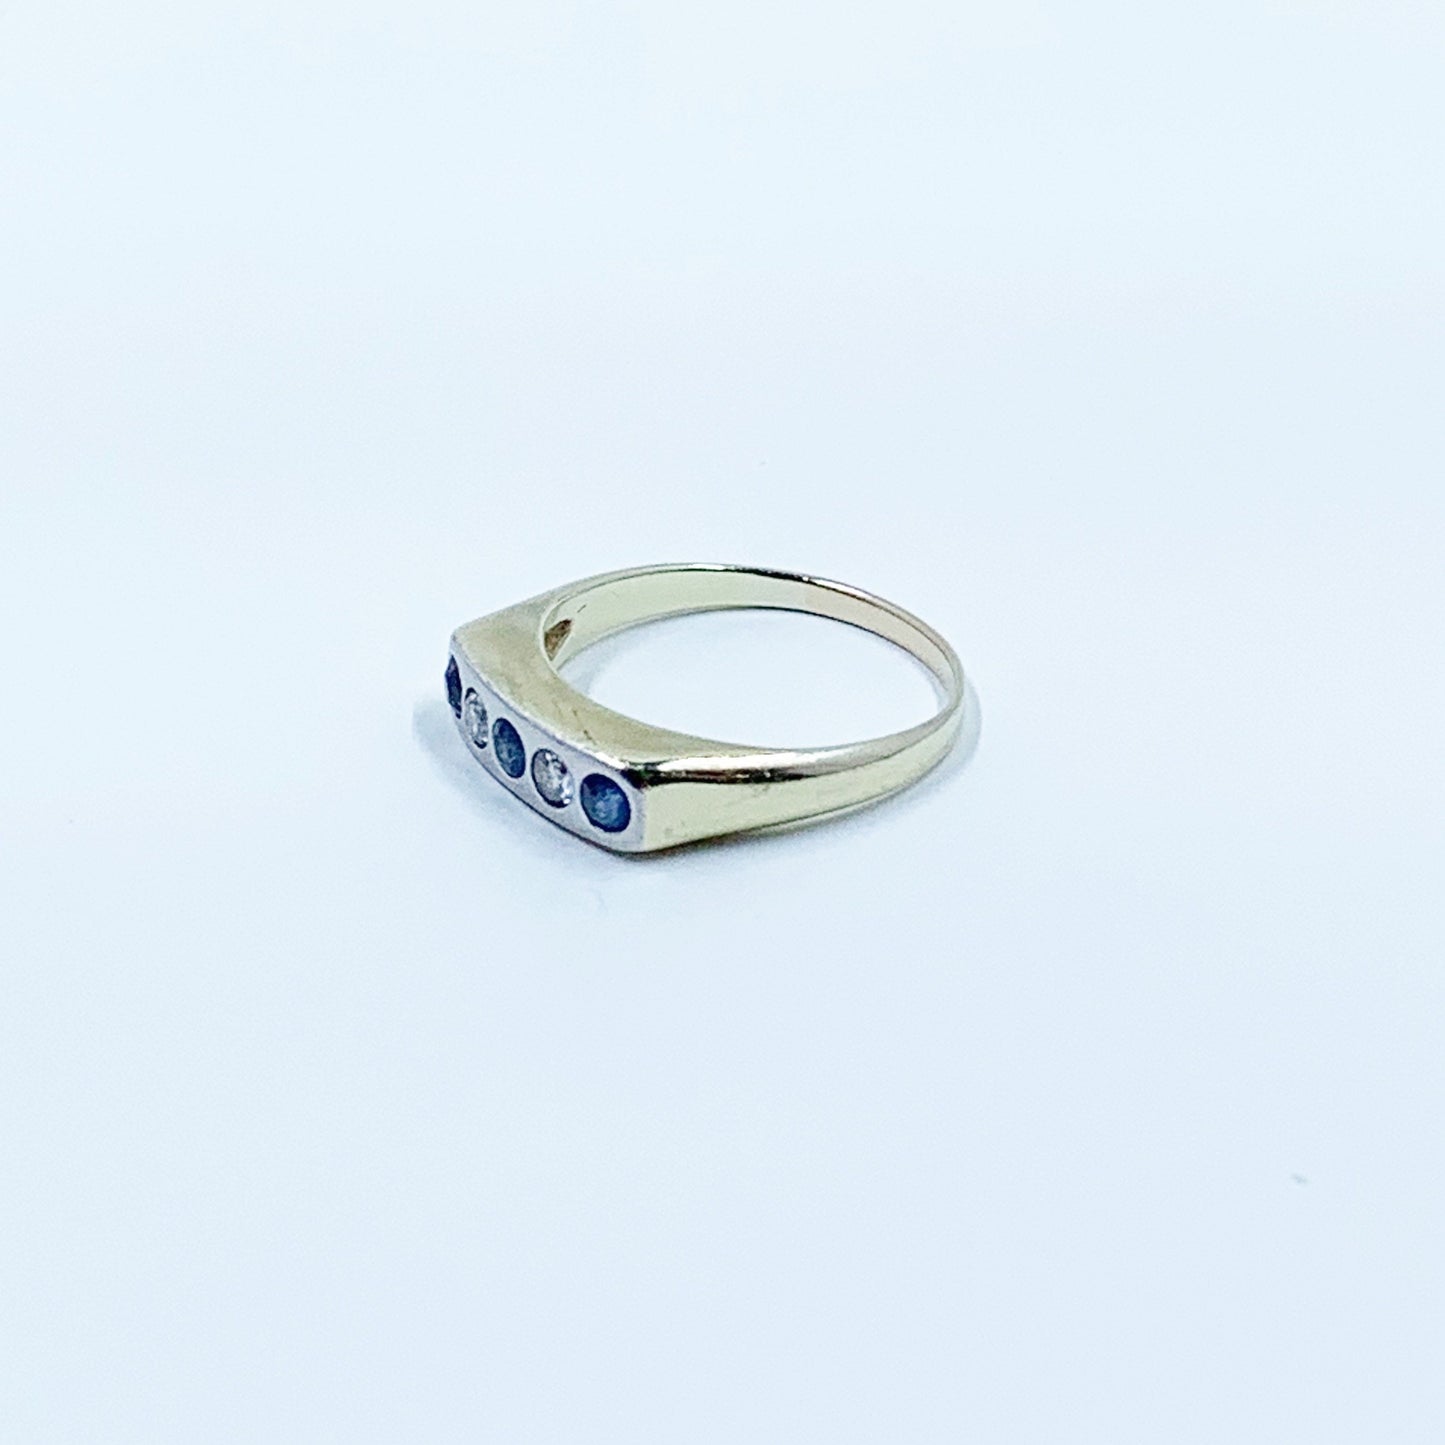 Vintage Diamond and Sapphire 5 Stone Ring | White and Yellow Gold Stackable 15k Ring | Size 5.75 Ring